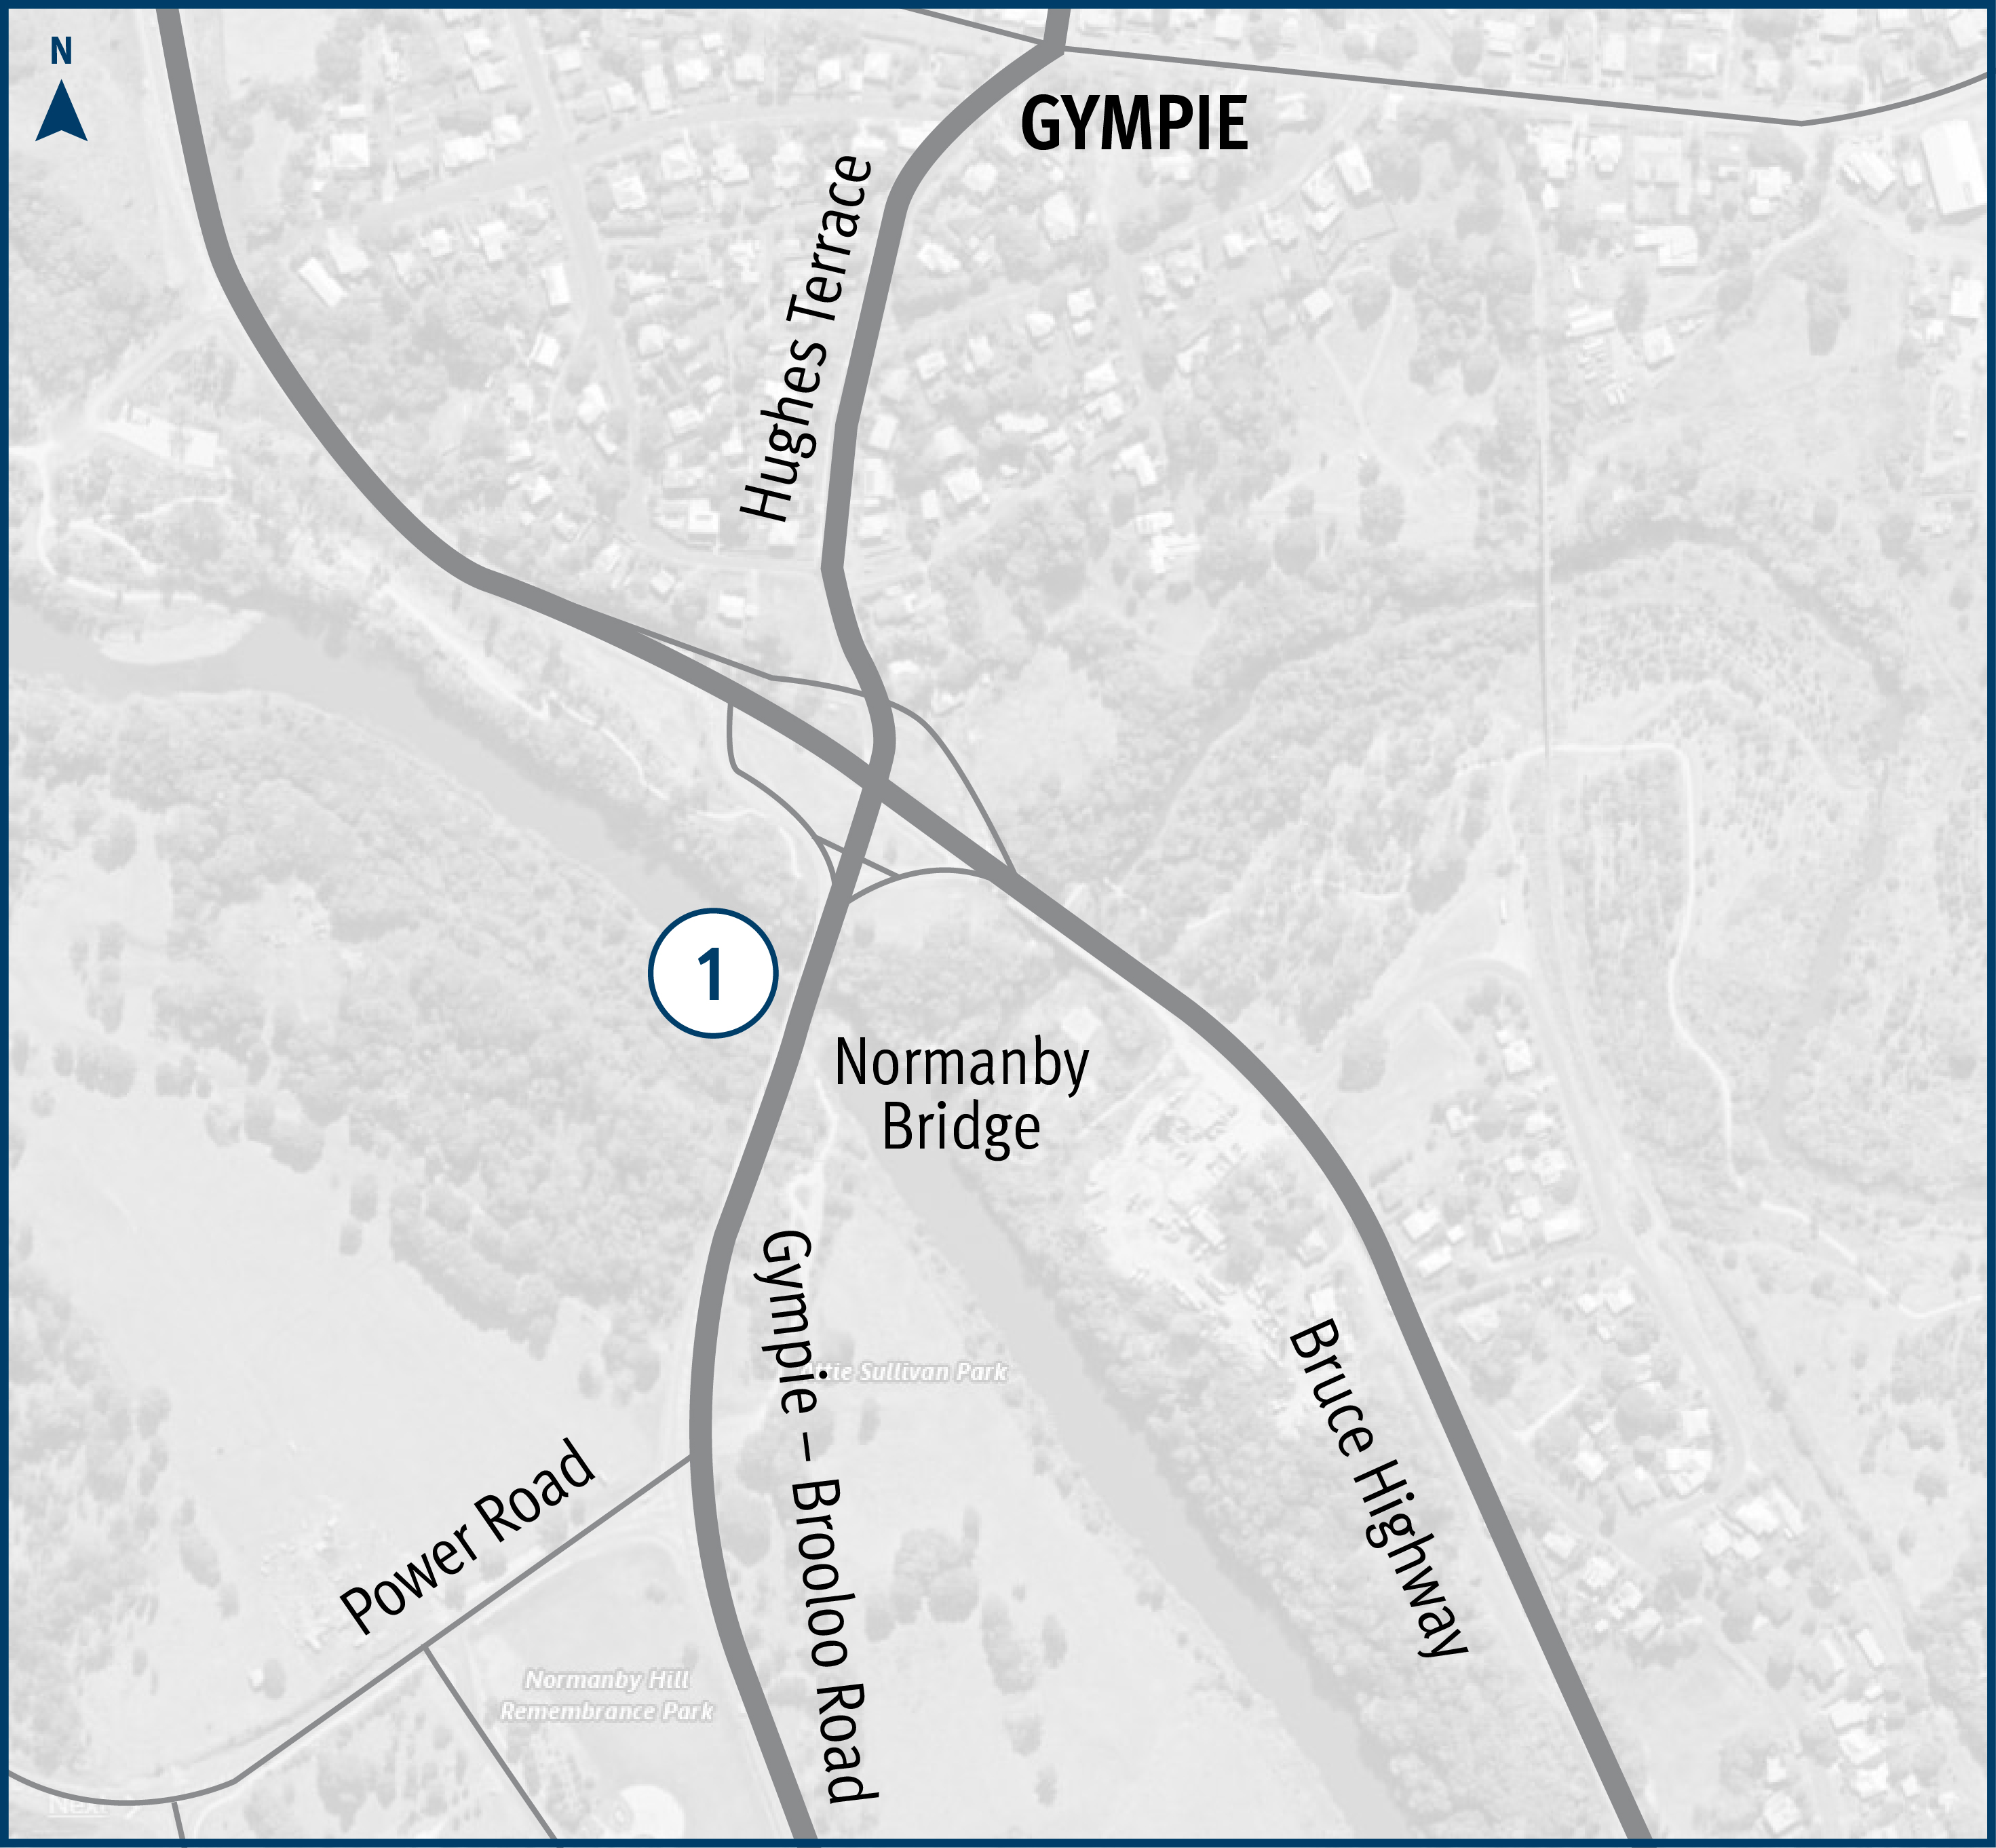 Gympie active transport map